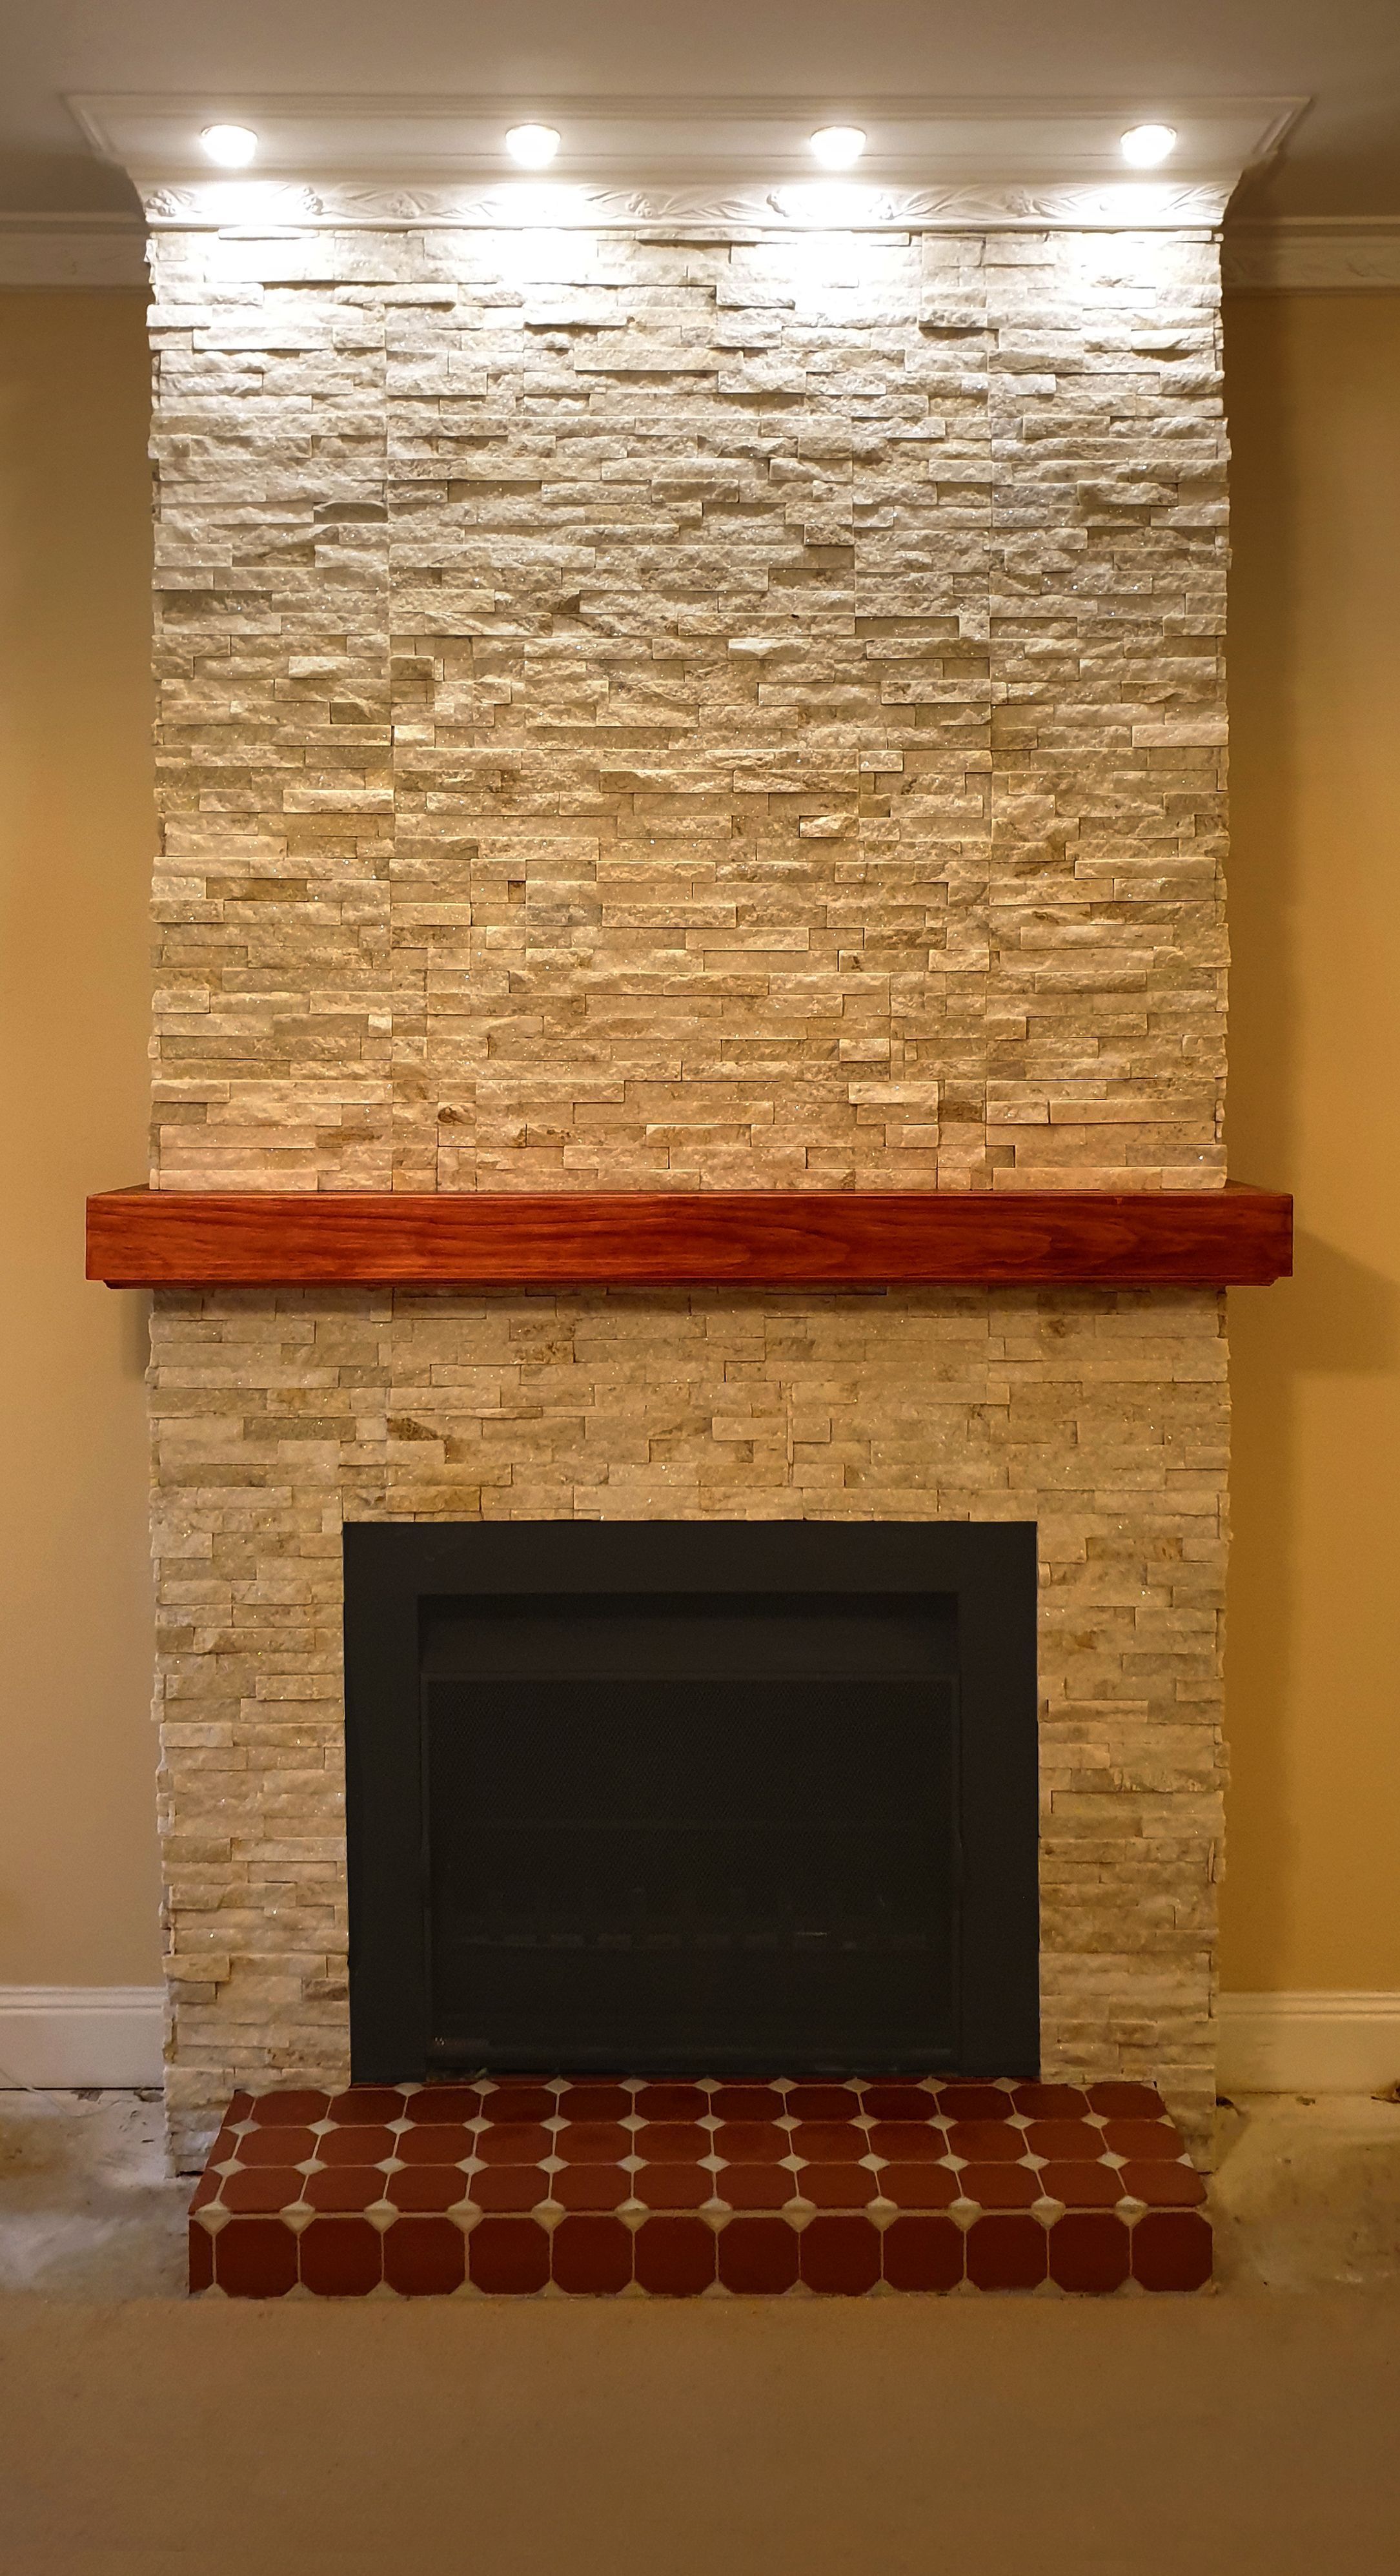 Cladding fireplace with stack stone | Bunnings Workshop community